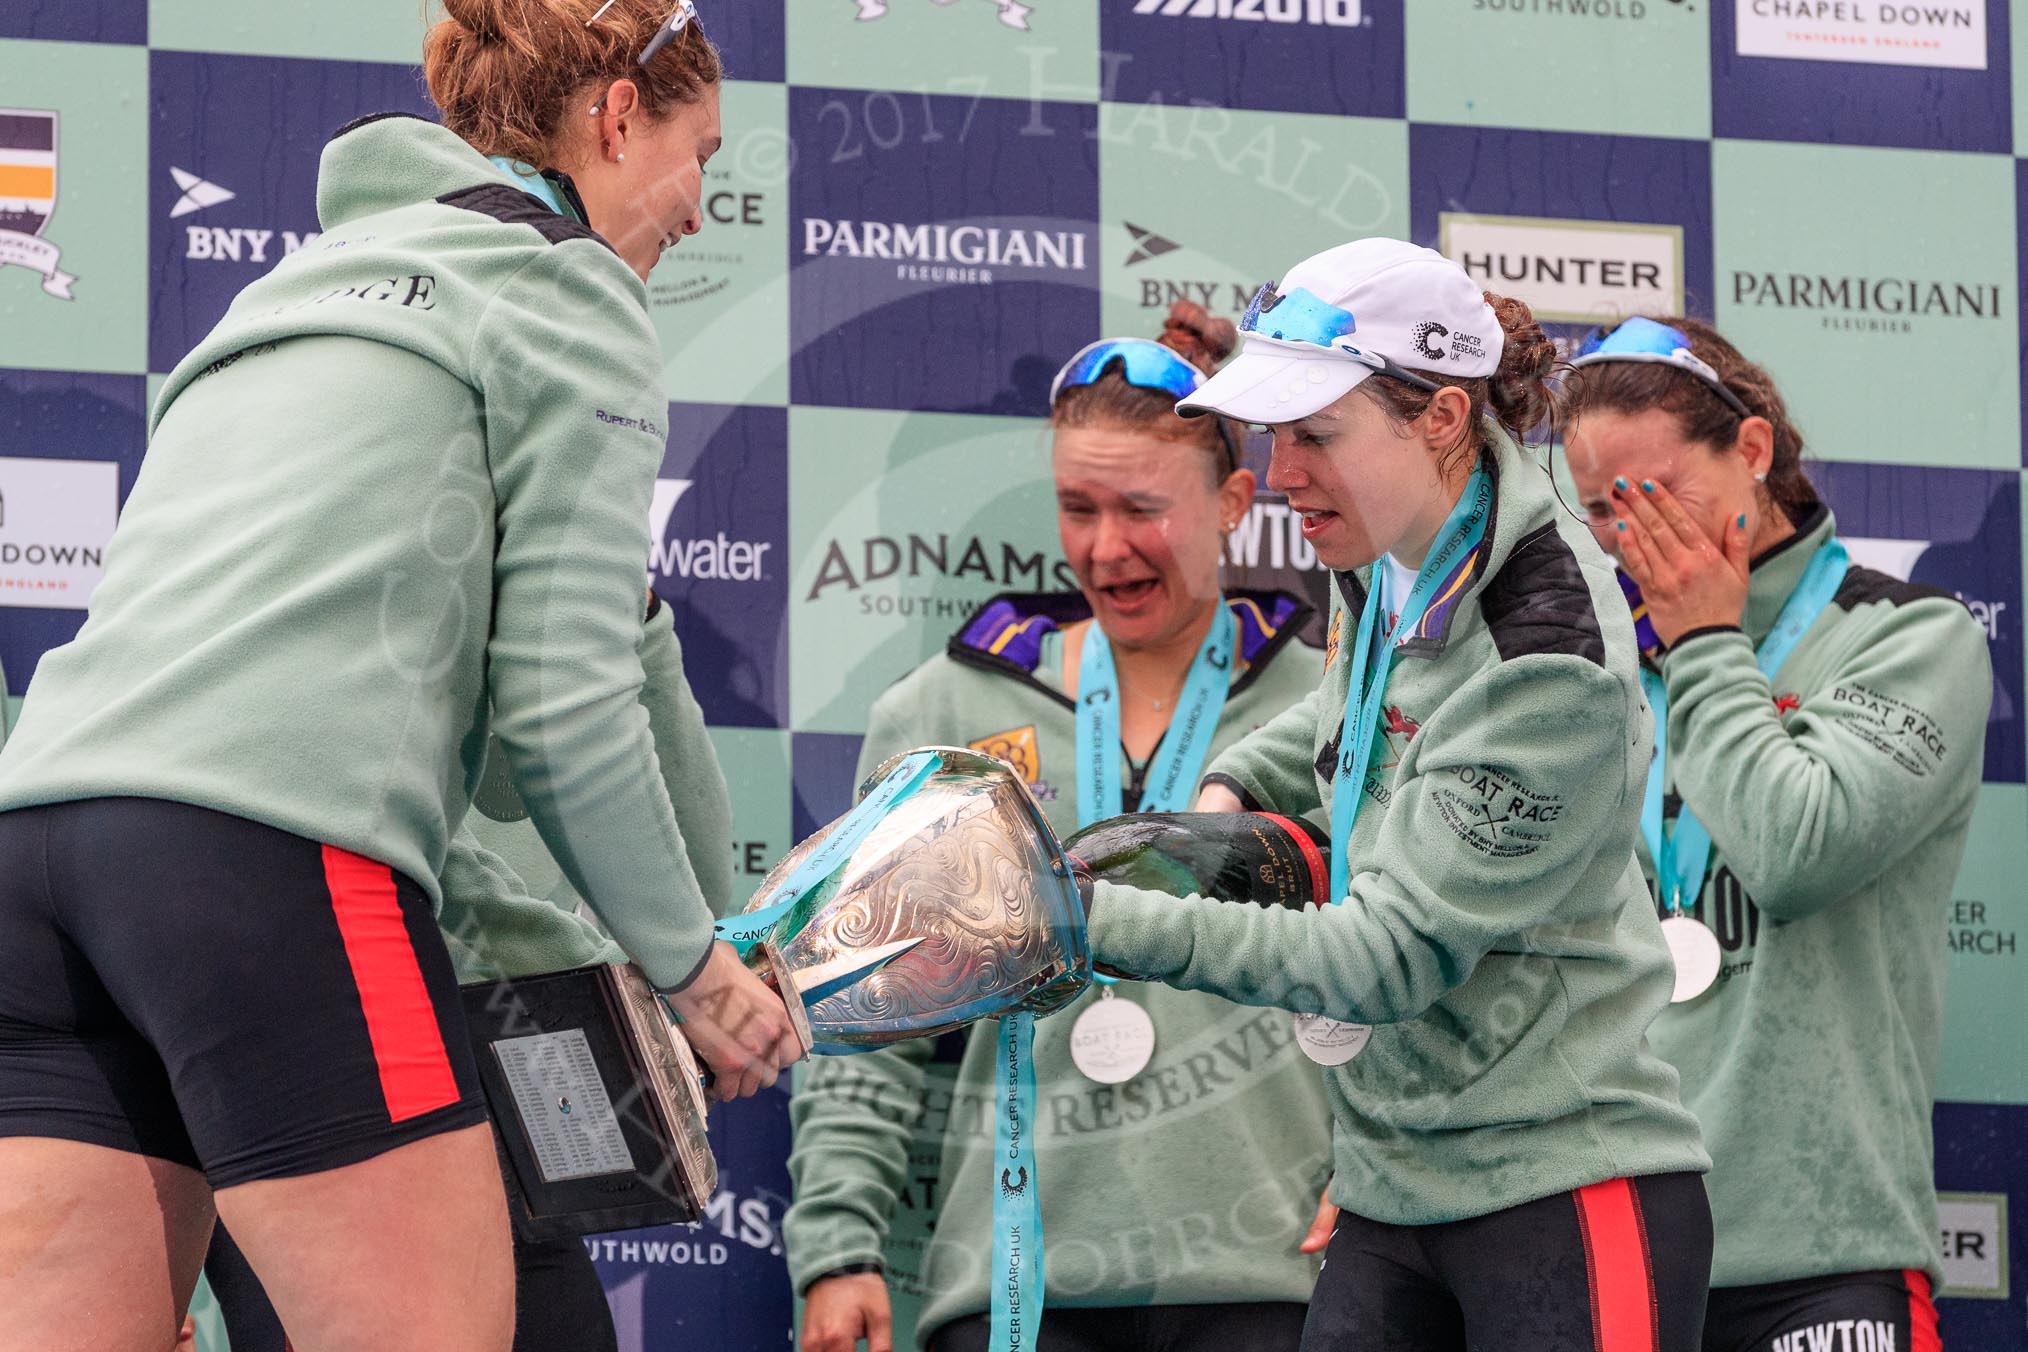 The Cancer Research UK Women's Boat Race 2018: Cambridge 7 seat Myriam Goudet-Boukhatmi ho;ding the Women's Boat Race trophy, and cox Sophie Shapter filling it with champagne.
River Thames between Putney Bridge and Mortlake,
London SW15,

United Kingdom,
on 24 March 2018 at 17:09, image #288